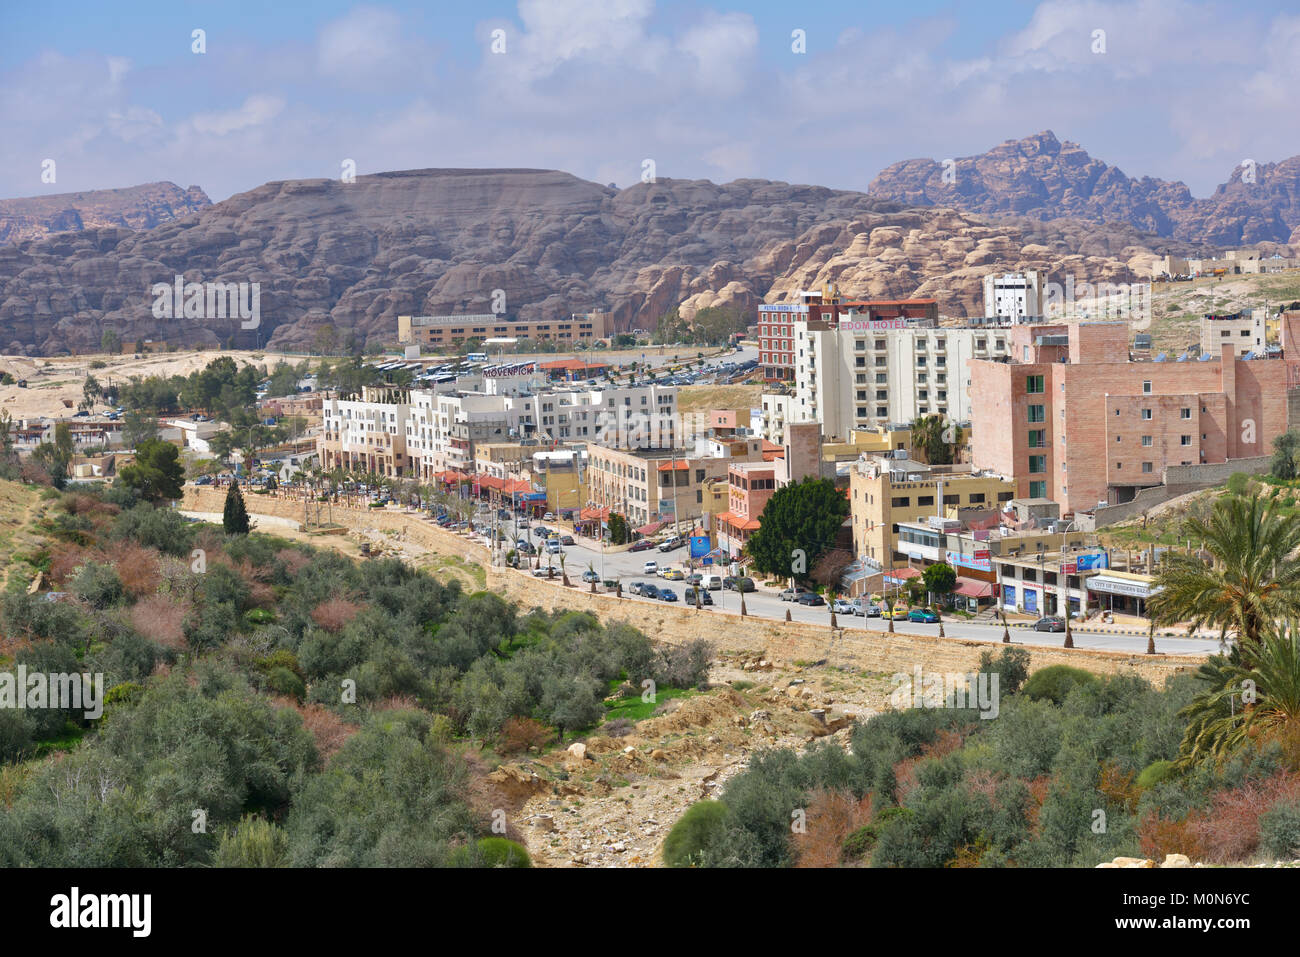 Wadi Musa, Jordan - March 15, 2014: Cityscape of Wadi Musa. It is the nearest town to the archaeological site of Petra and hosts many hotels and resta Stock Photo